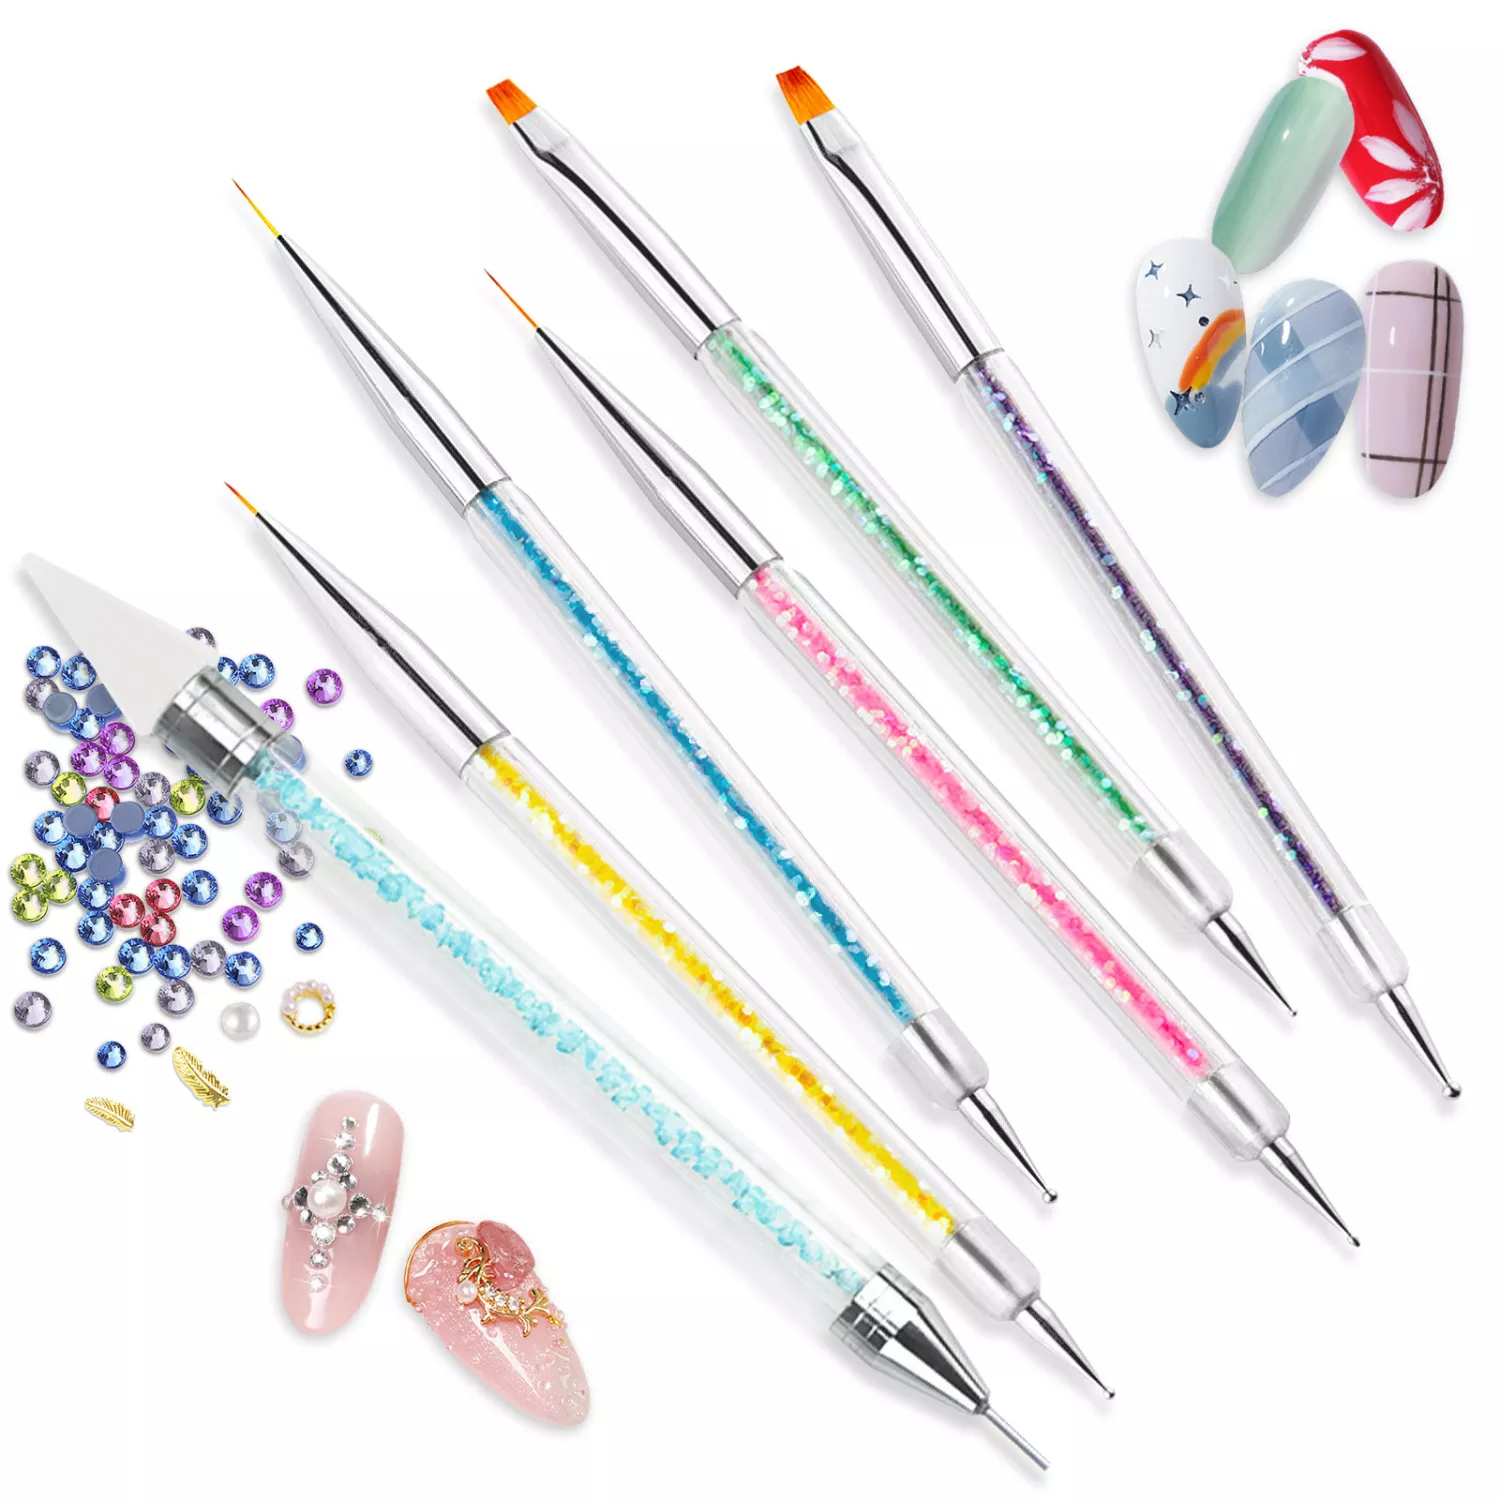 Nail Rhinestone Picker Dotting Tool, 3pcs Nail Art Brushes for Painting  with Different Size, Dual-ended